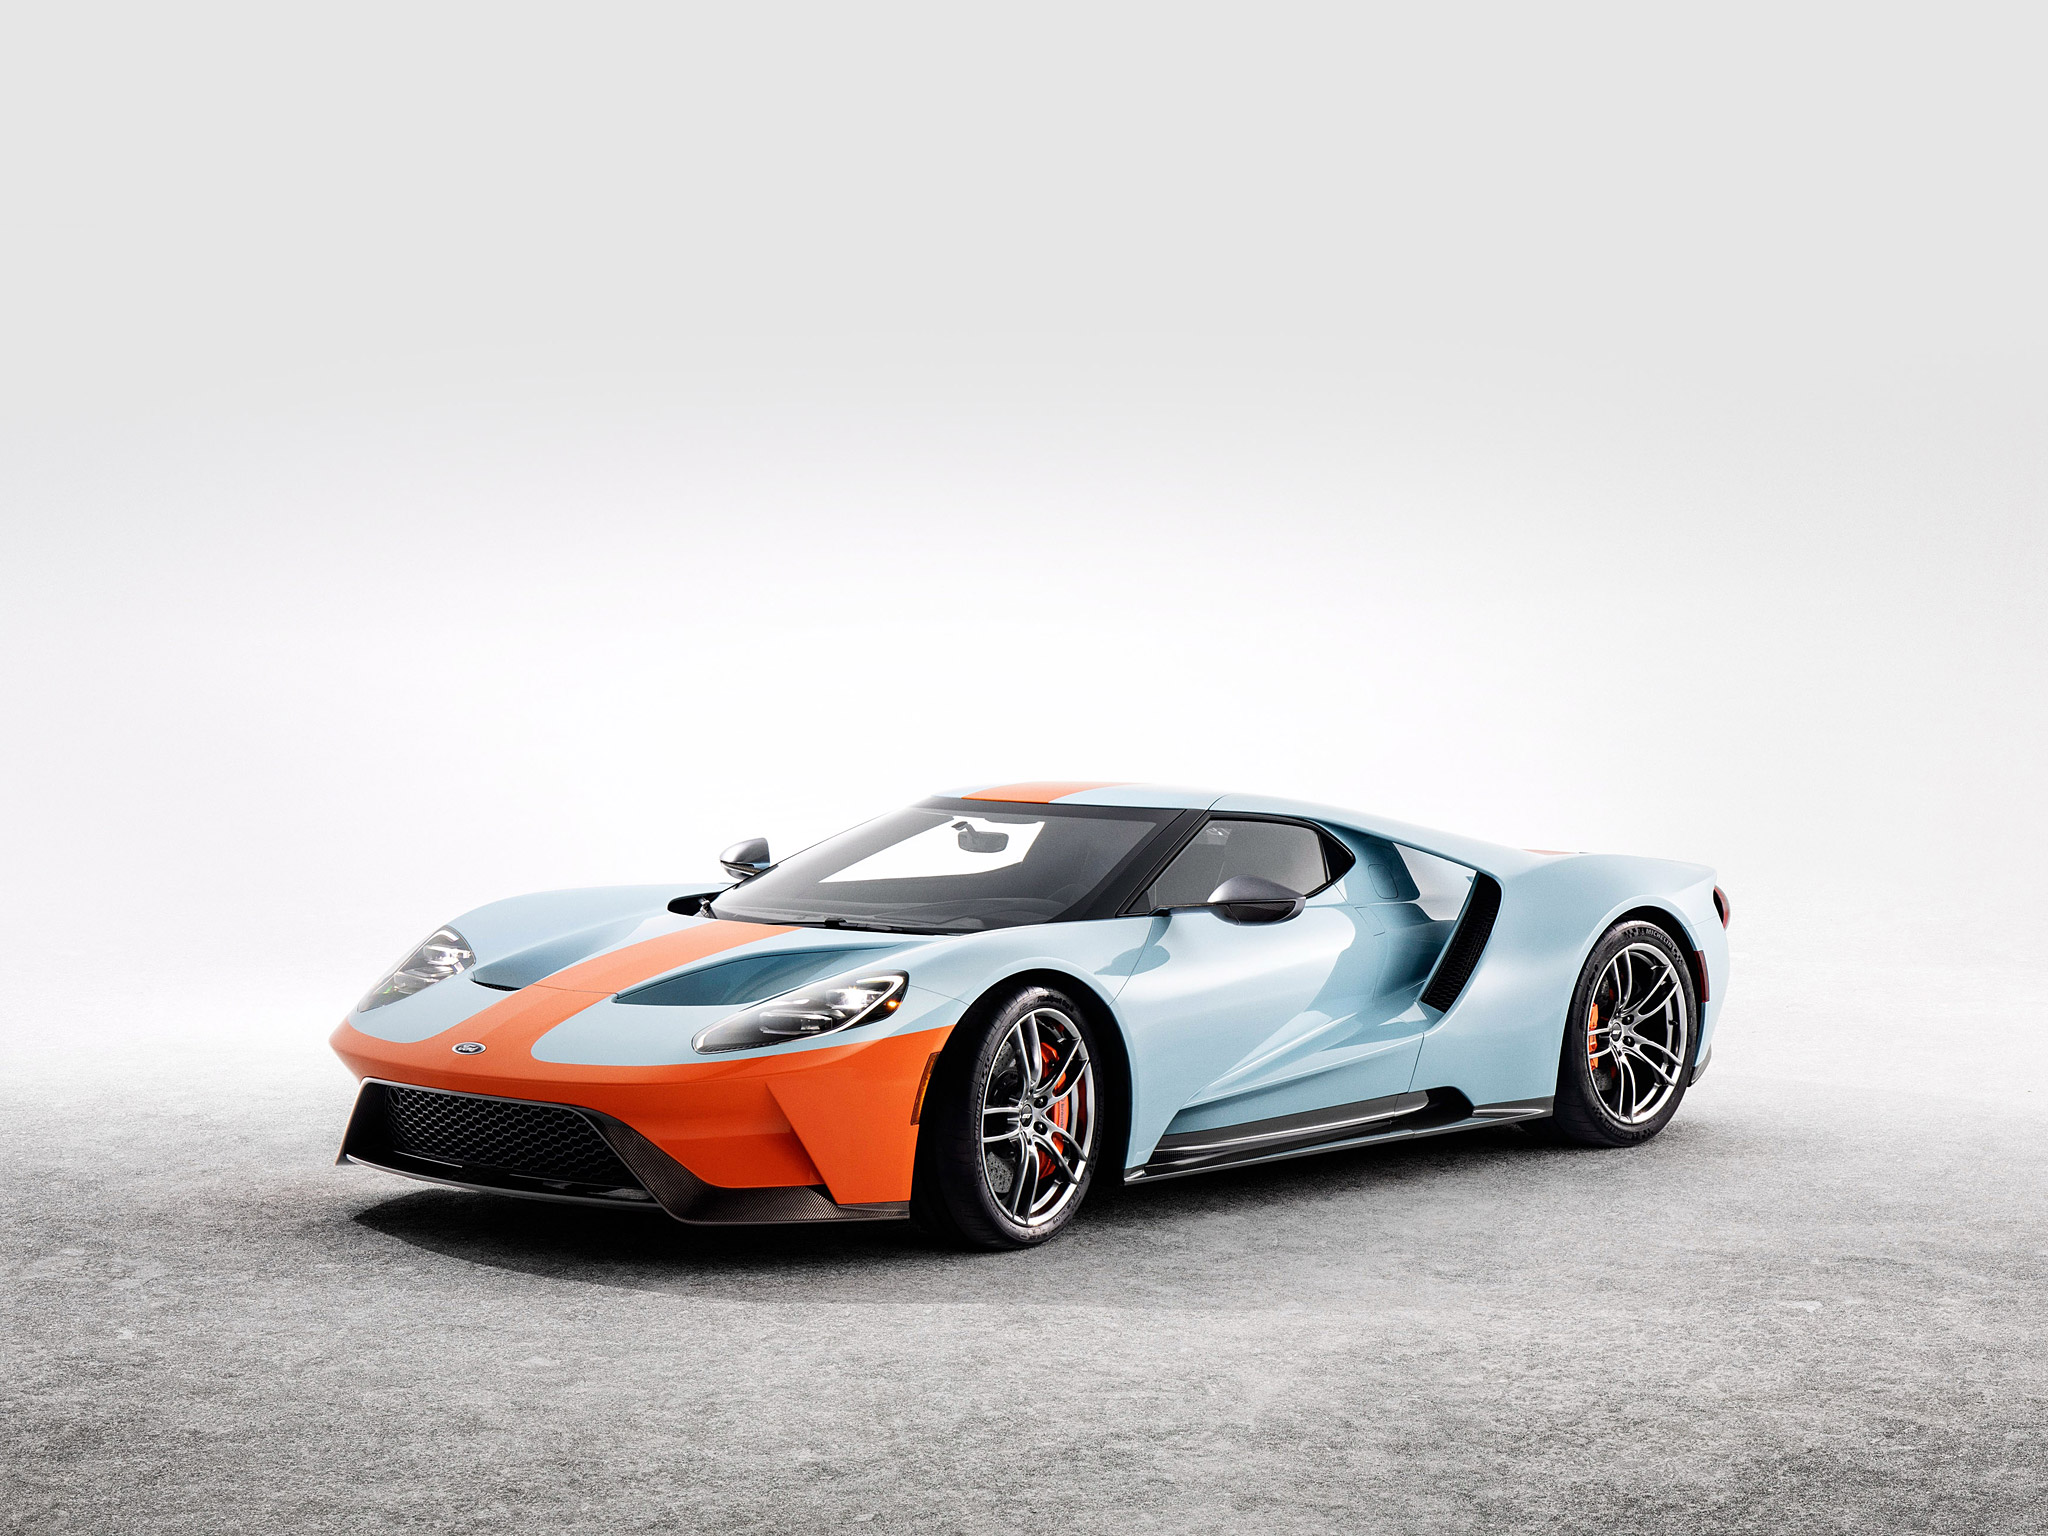  2019 Ford GT Heritage Edition Wallpaper.